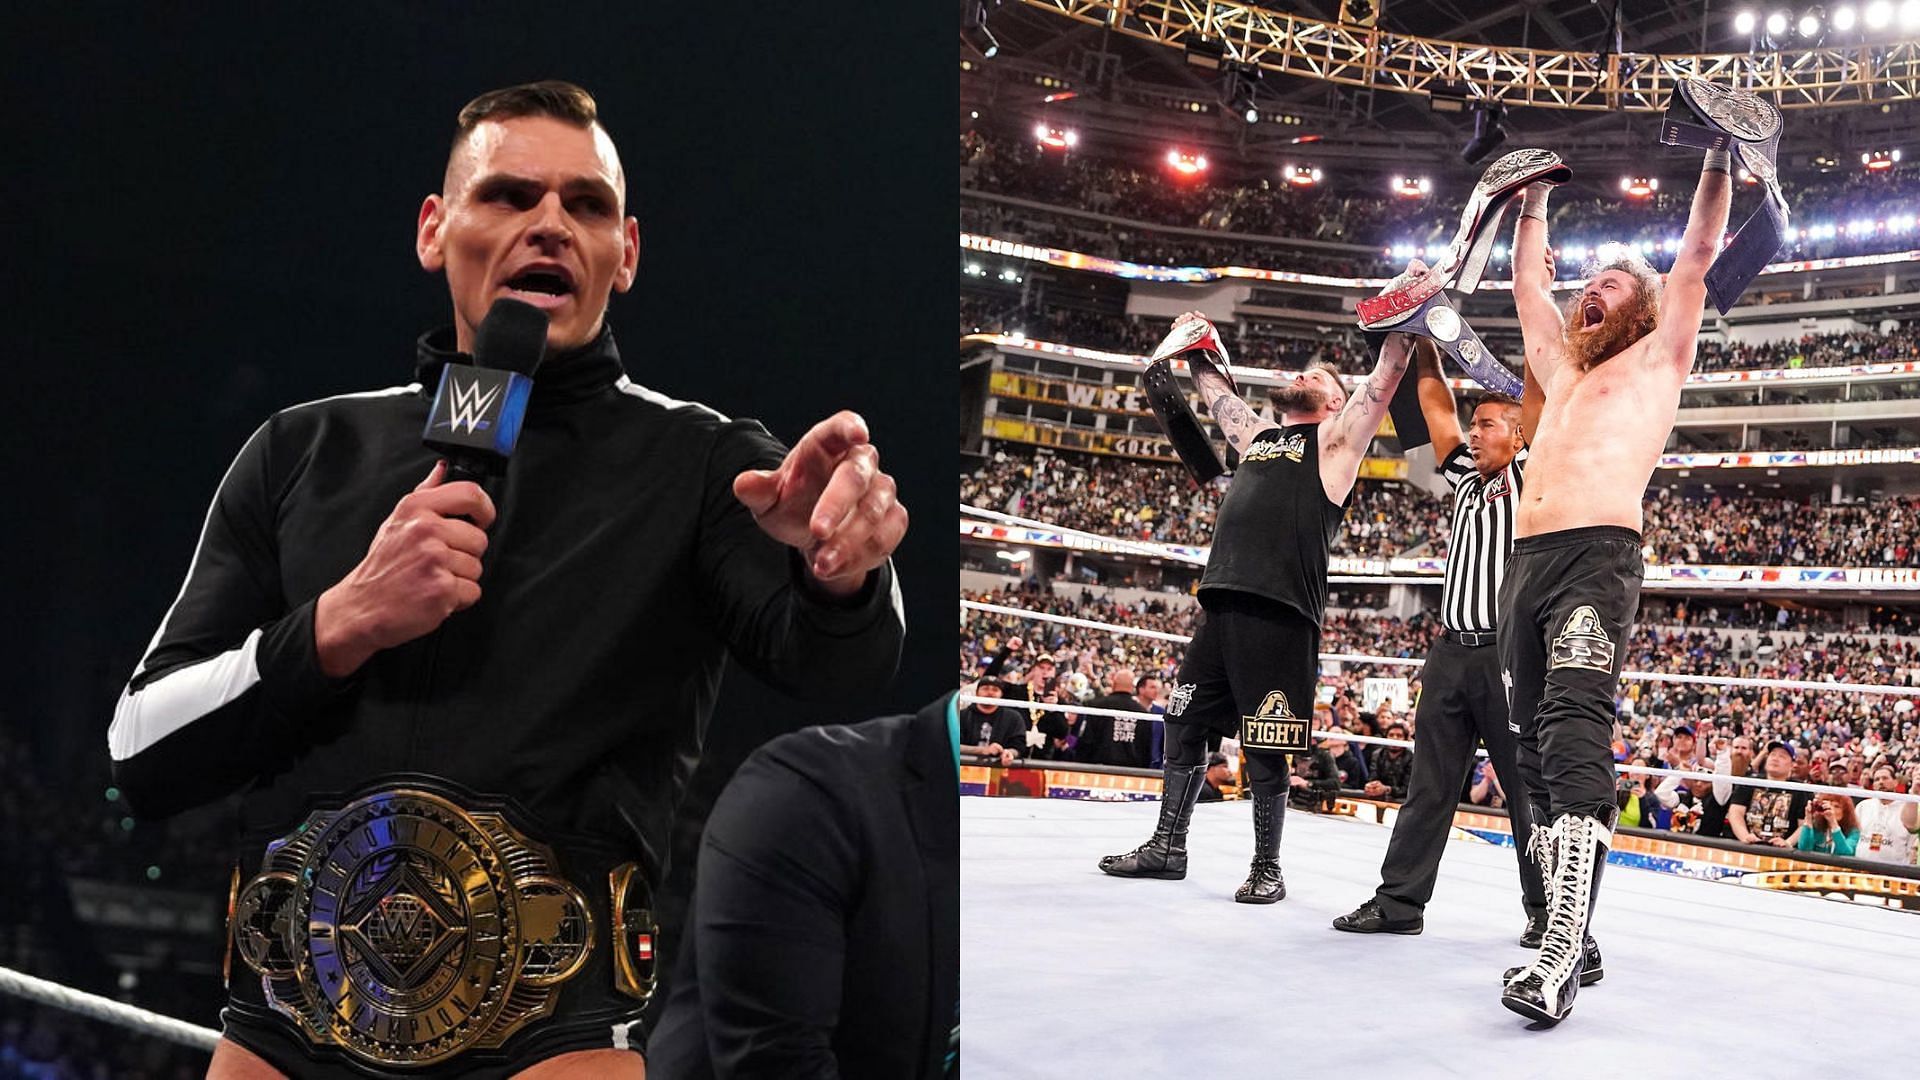 The Game has elevated WWE&#039;s mid-card and tag team titles to main event-worthy attractions